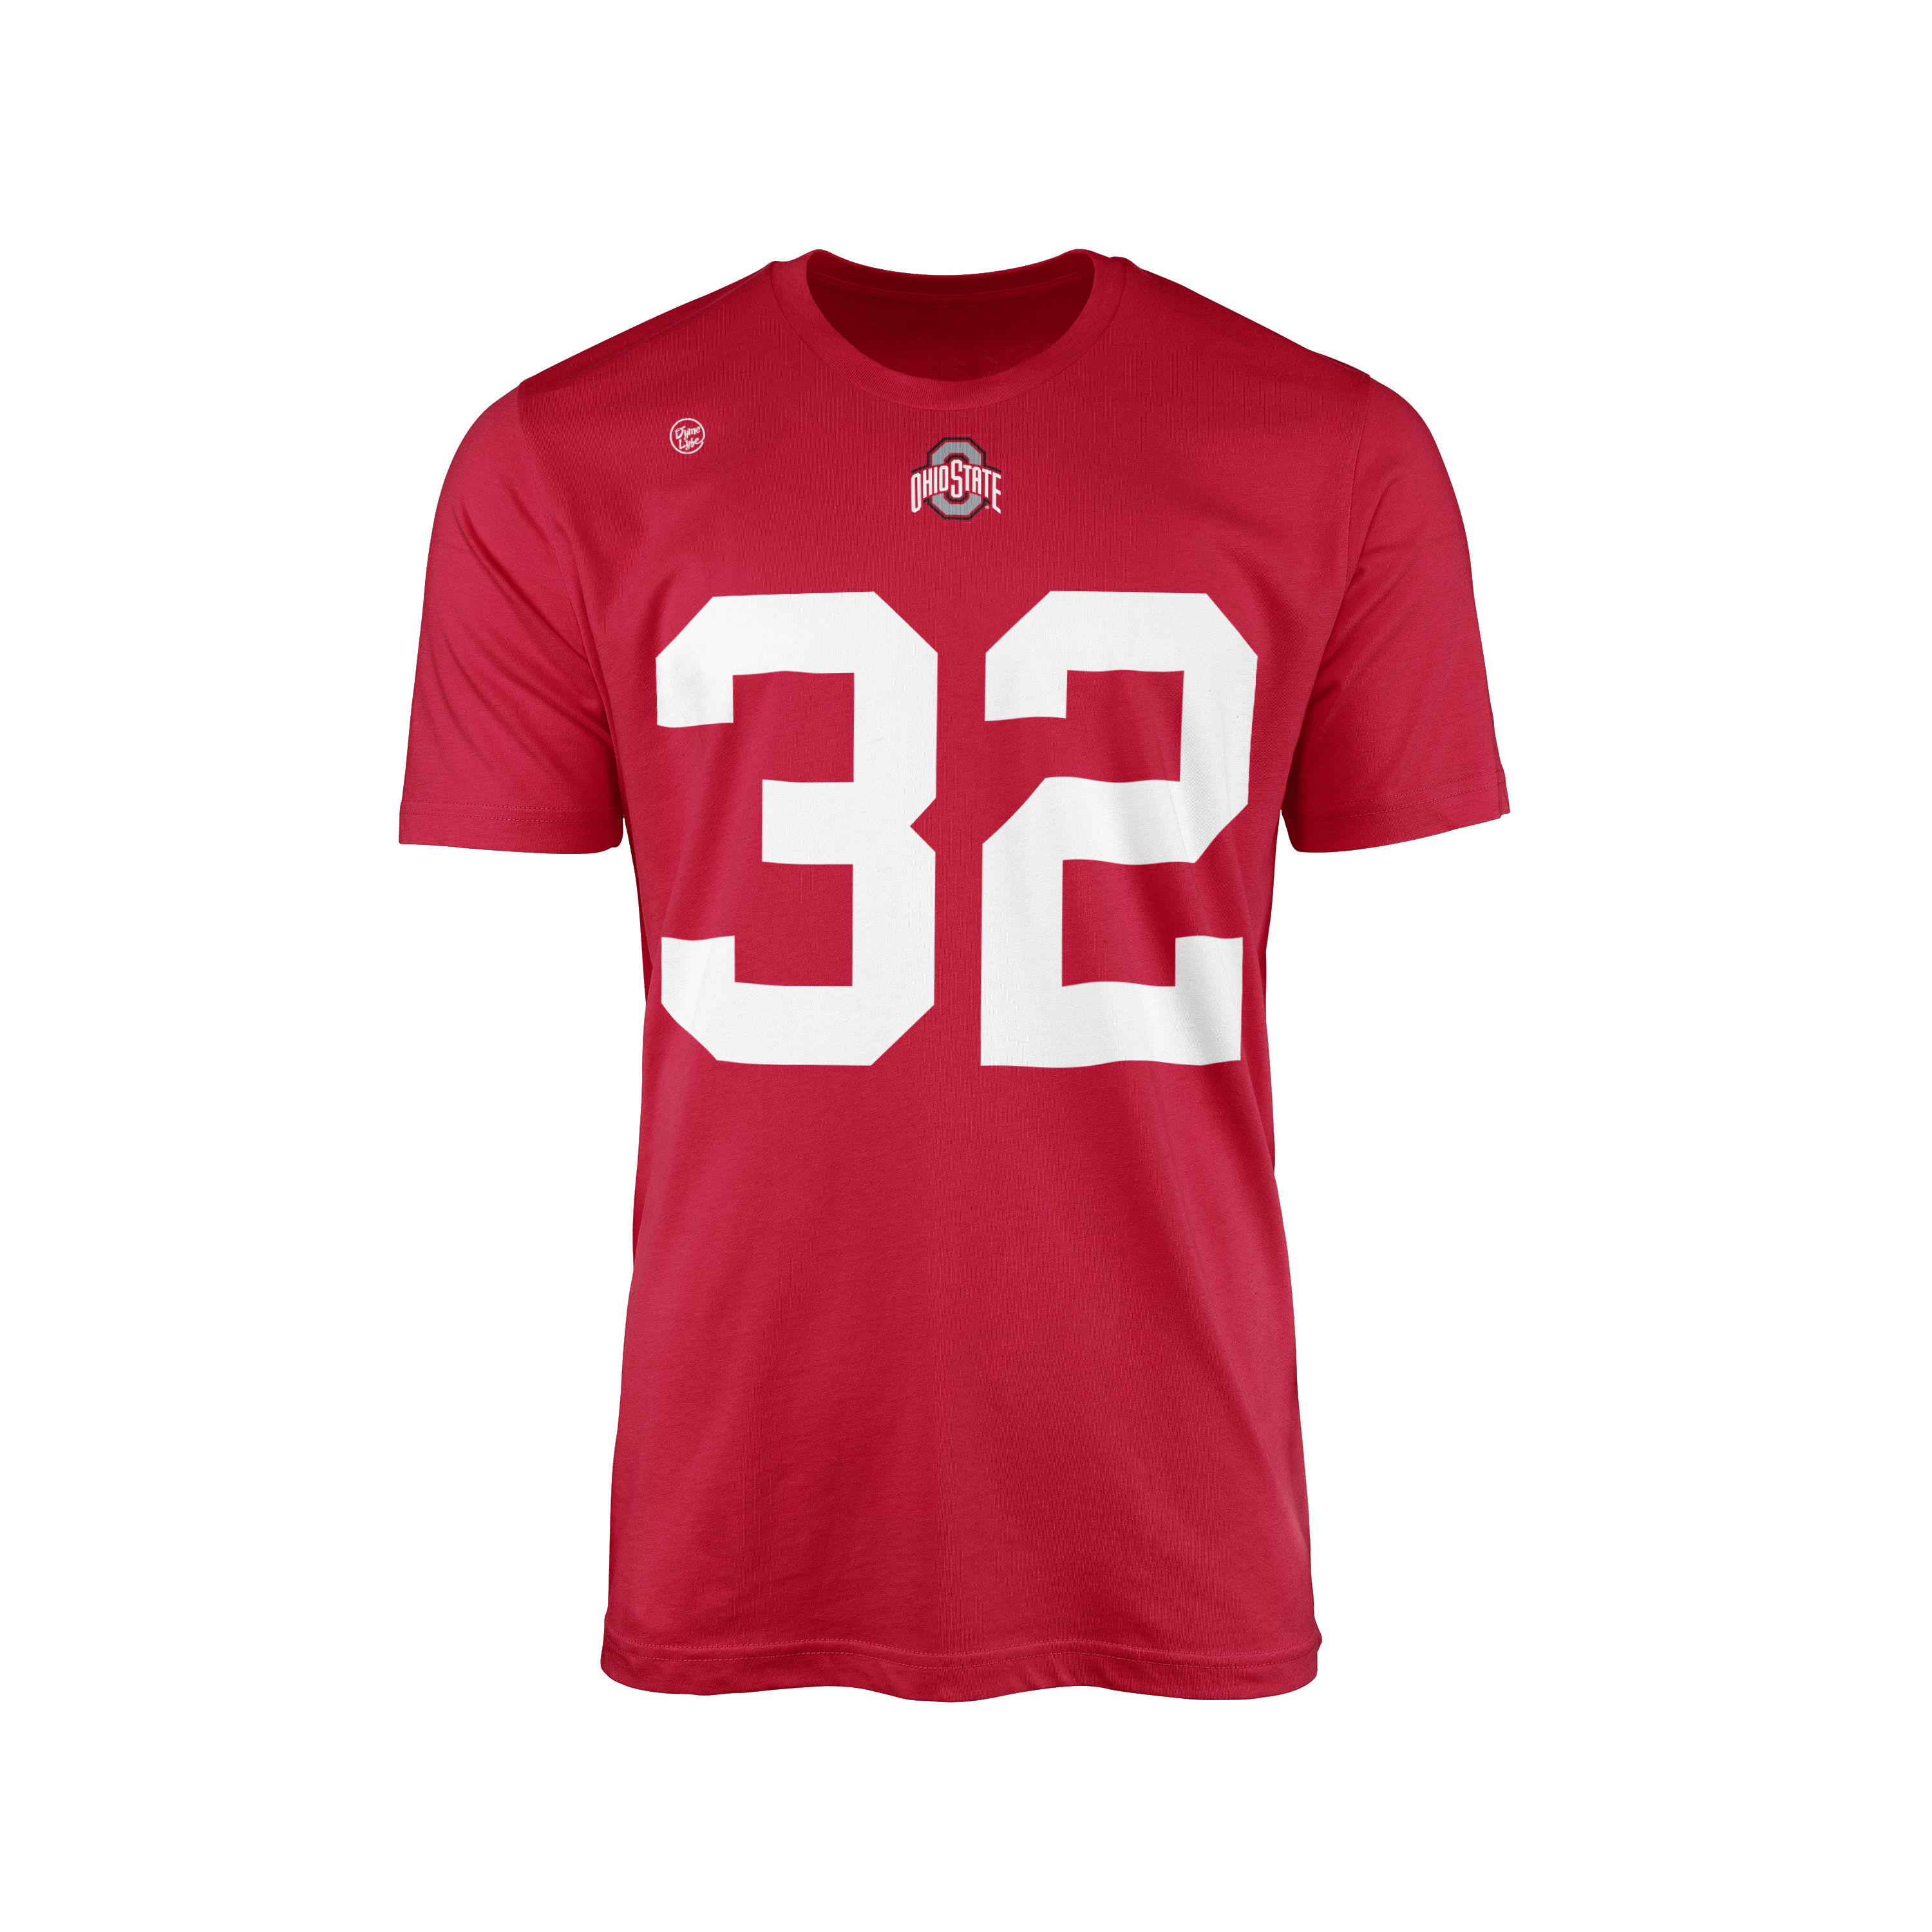 Dyme Lyfe | Officially Licensed Collegiate Apparel | Ohio State Buckeyes Men’s Treveyon Henderson Name & Number T-Shirt, Size: S, The Ohio State